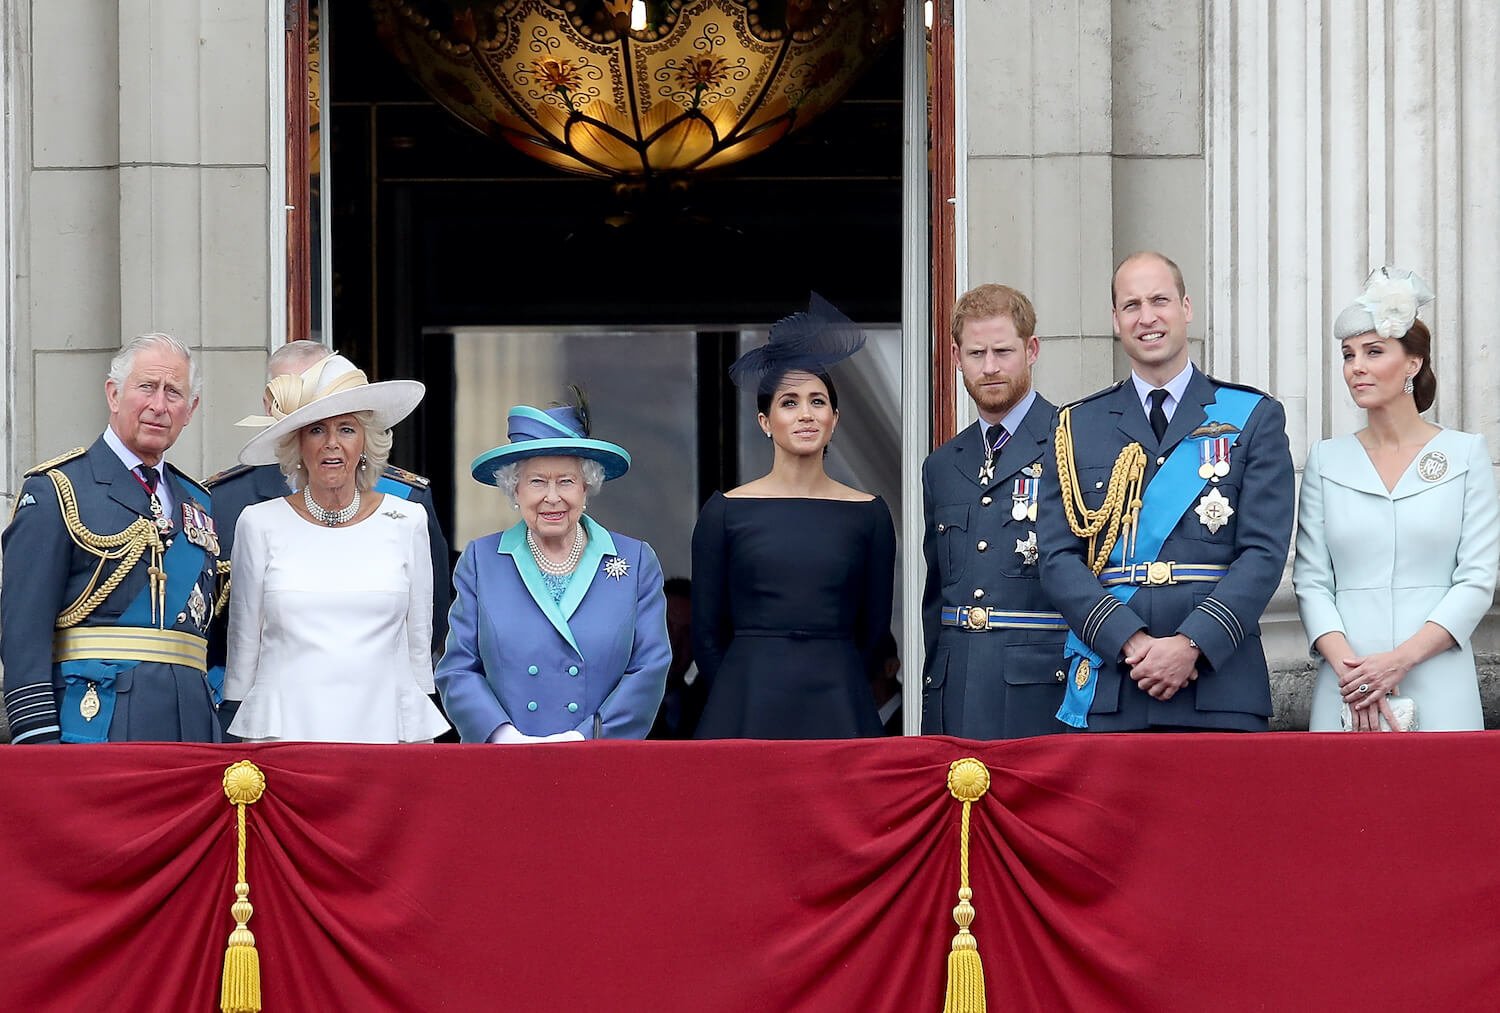 Prince Harry stands with royal family members, King Charles, Camilla Parker Bowles, Queen Elizabeth, Meghan Markle, Prince William, and Kate Middleton on palace balcony